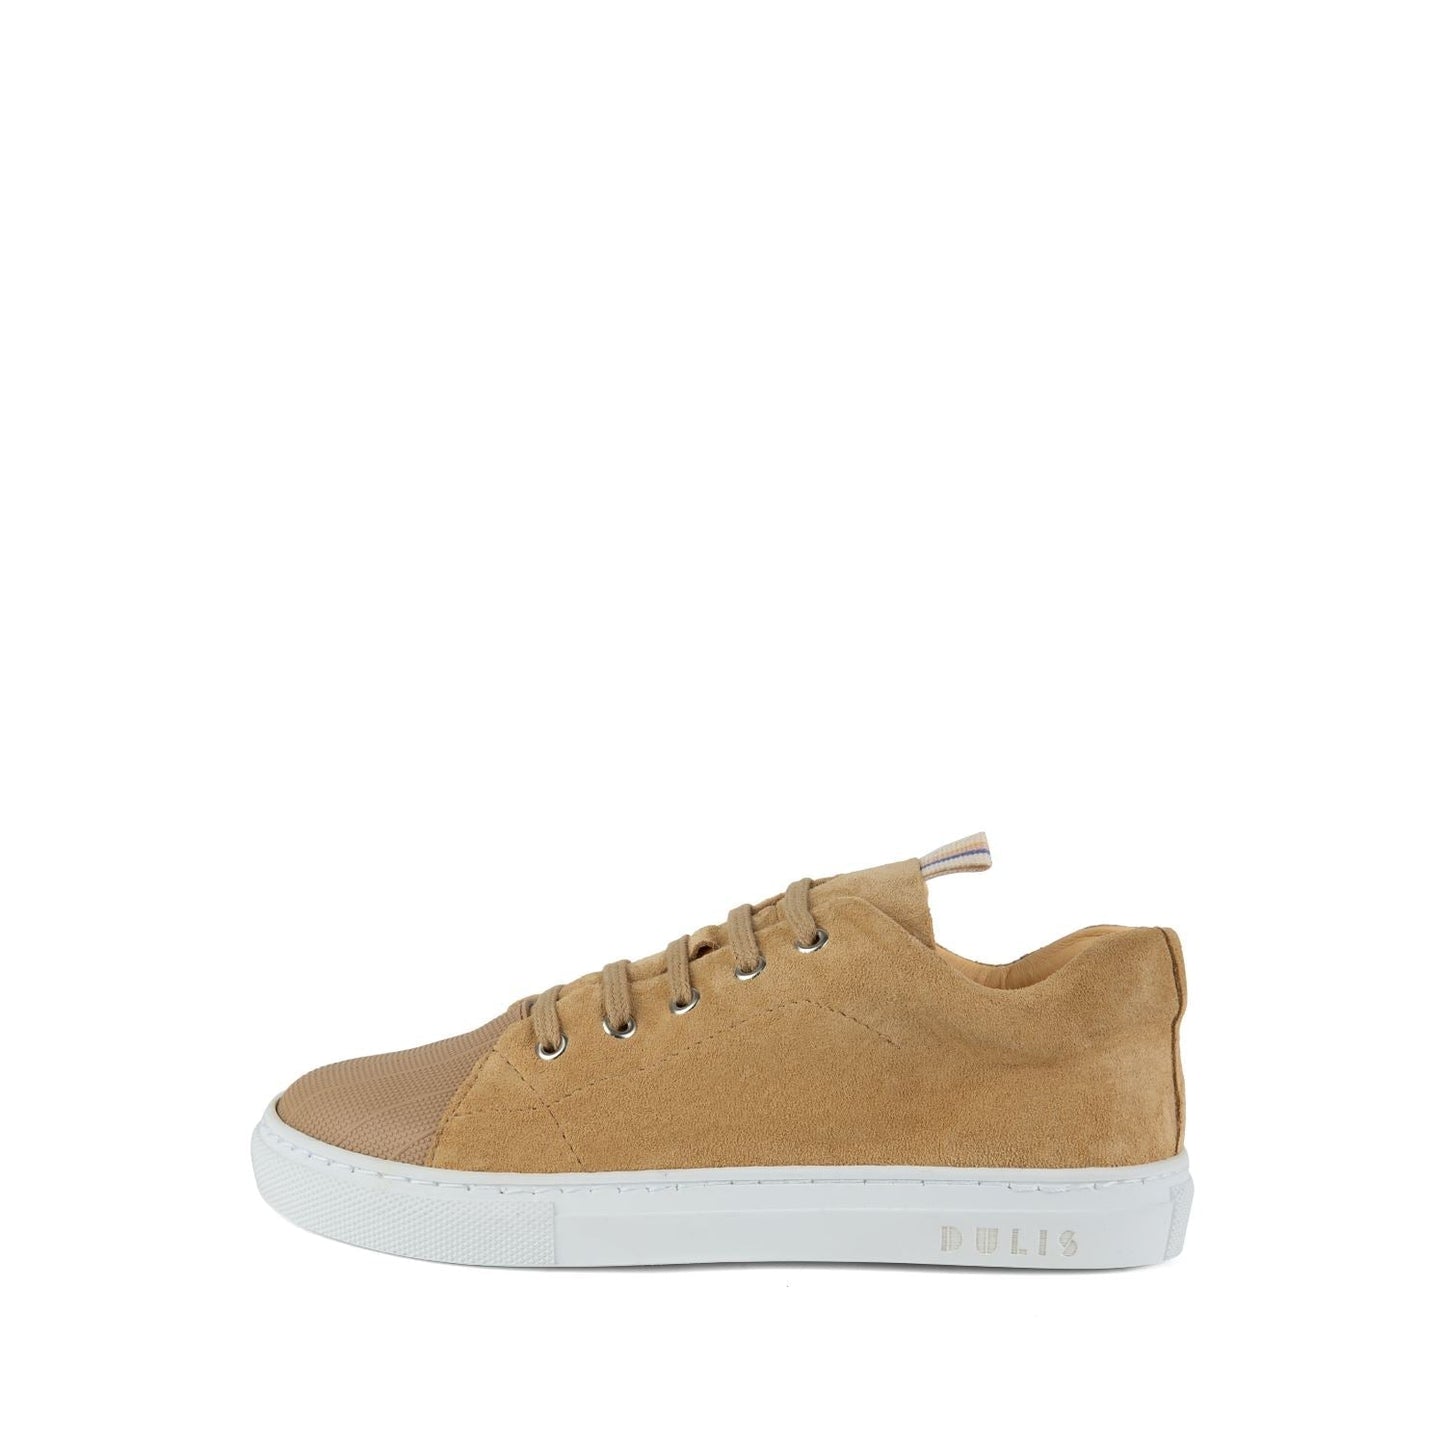 Beige Toe Sneakers Shoes Dulis Shoes 